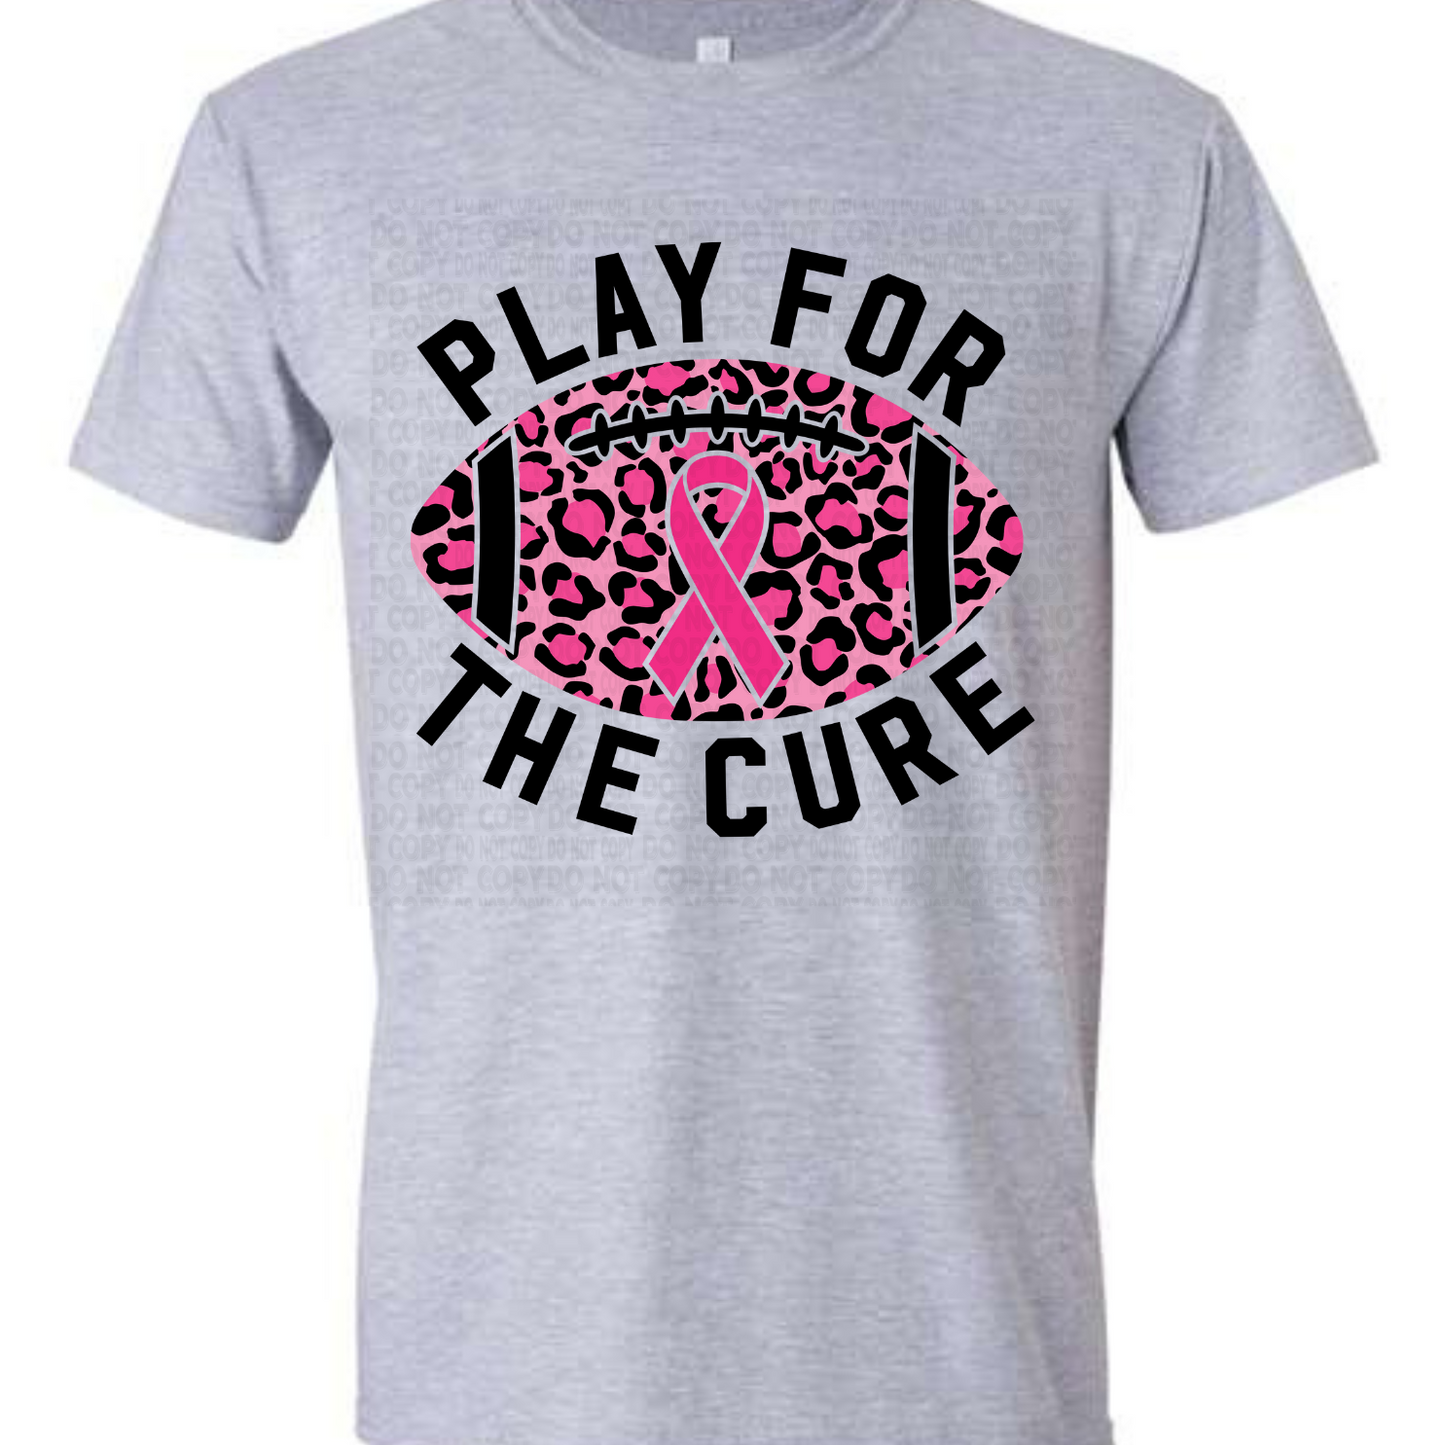 Play for the Cure